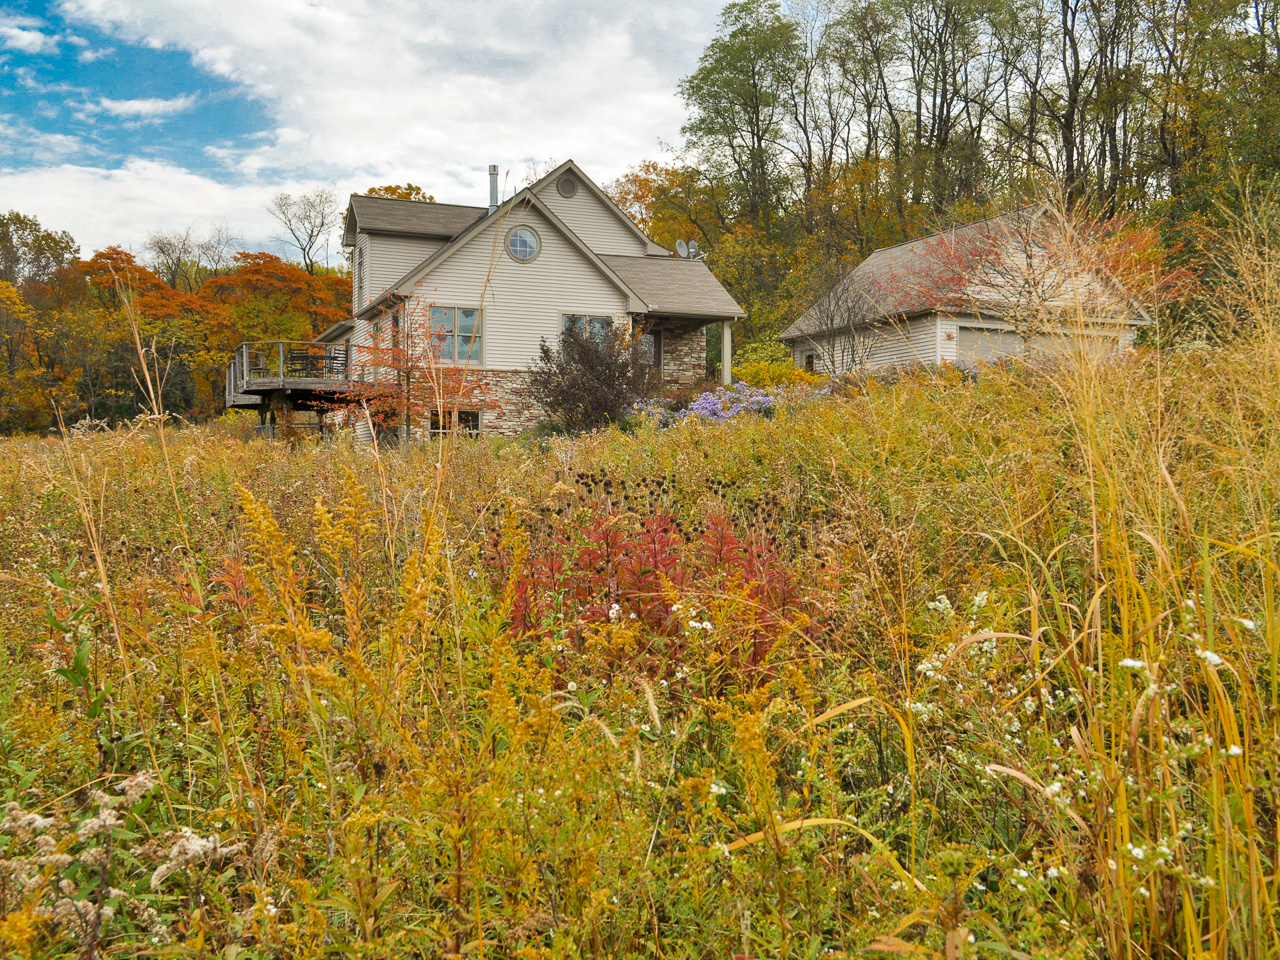 House situated behind a deep swath of meadow showing great fall colors